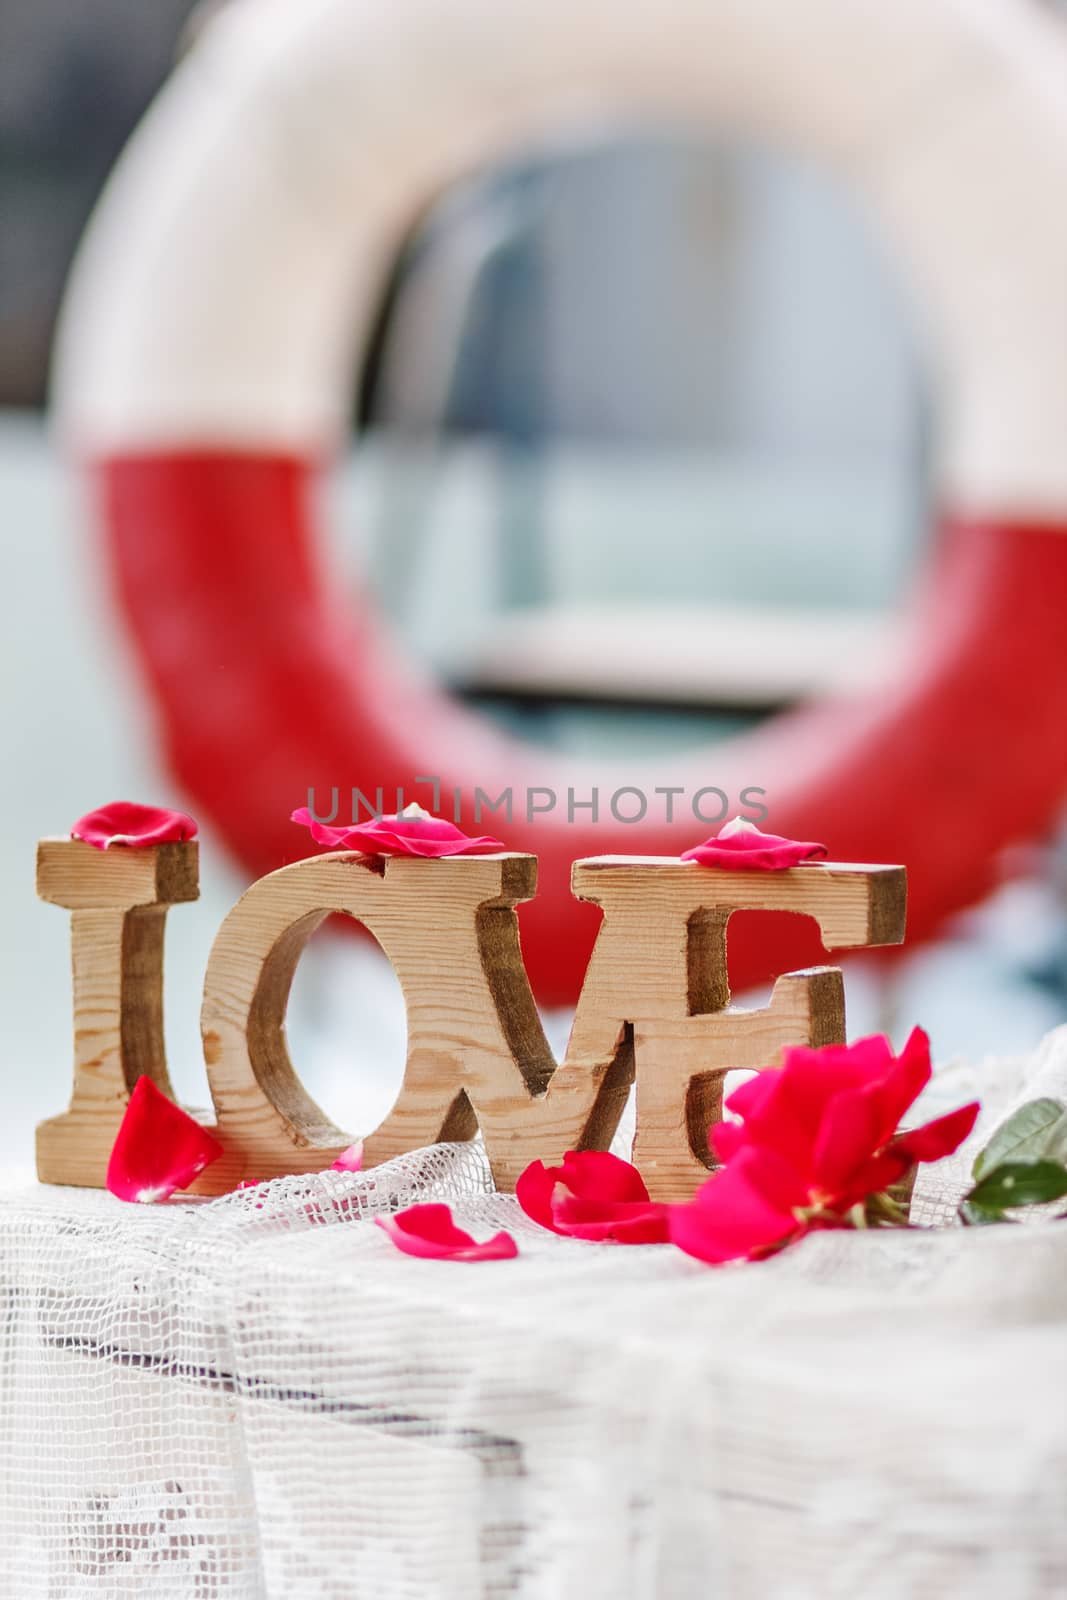 Carved wood word "Love" among pink rose petals on the background by natazhekova